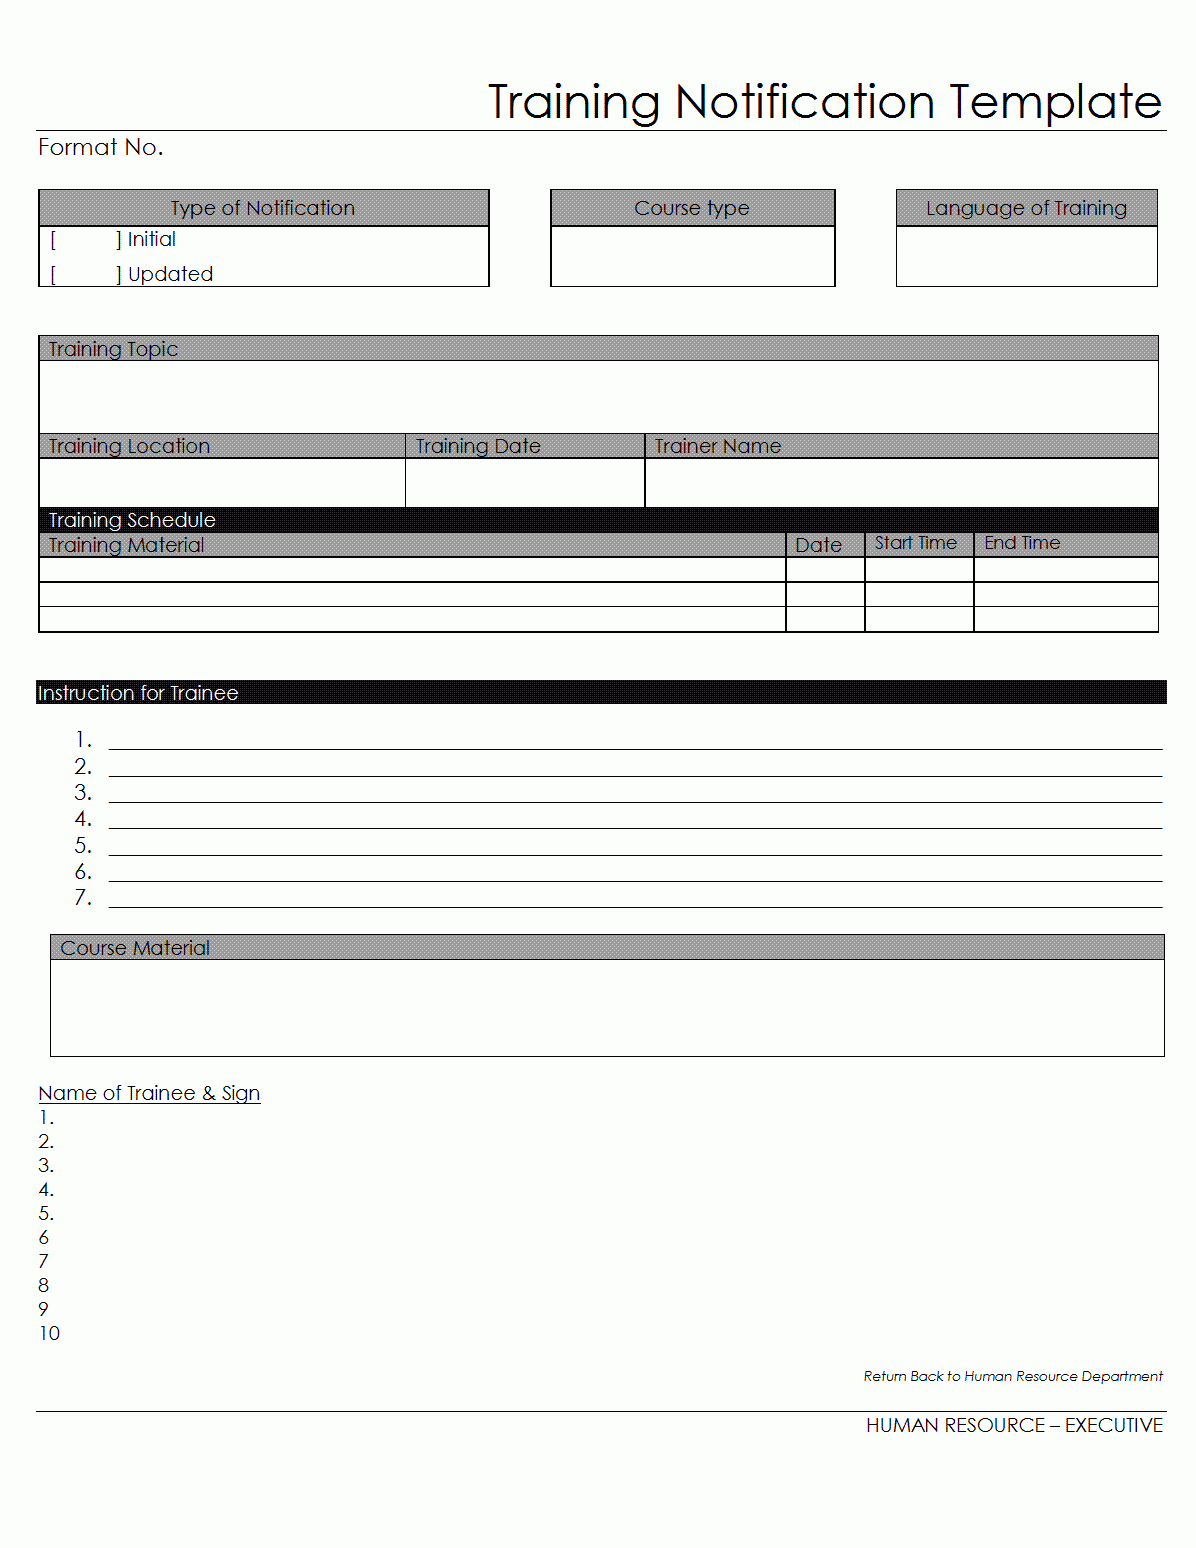 Training Notification Template - For Training Report Template Format